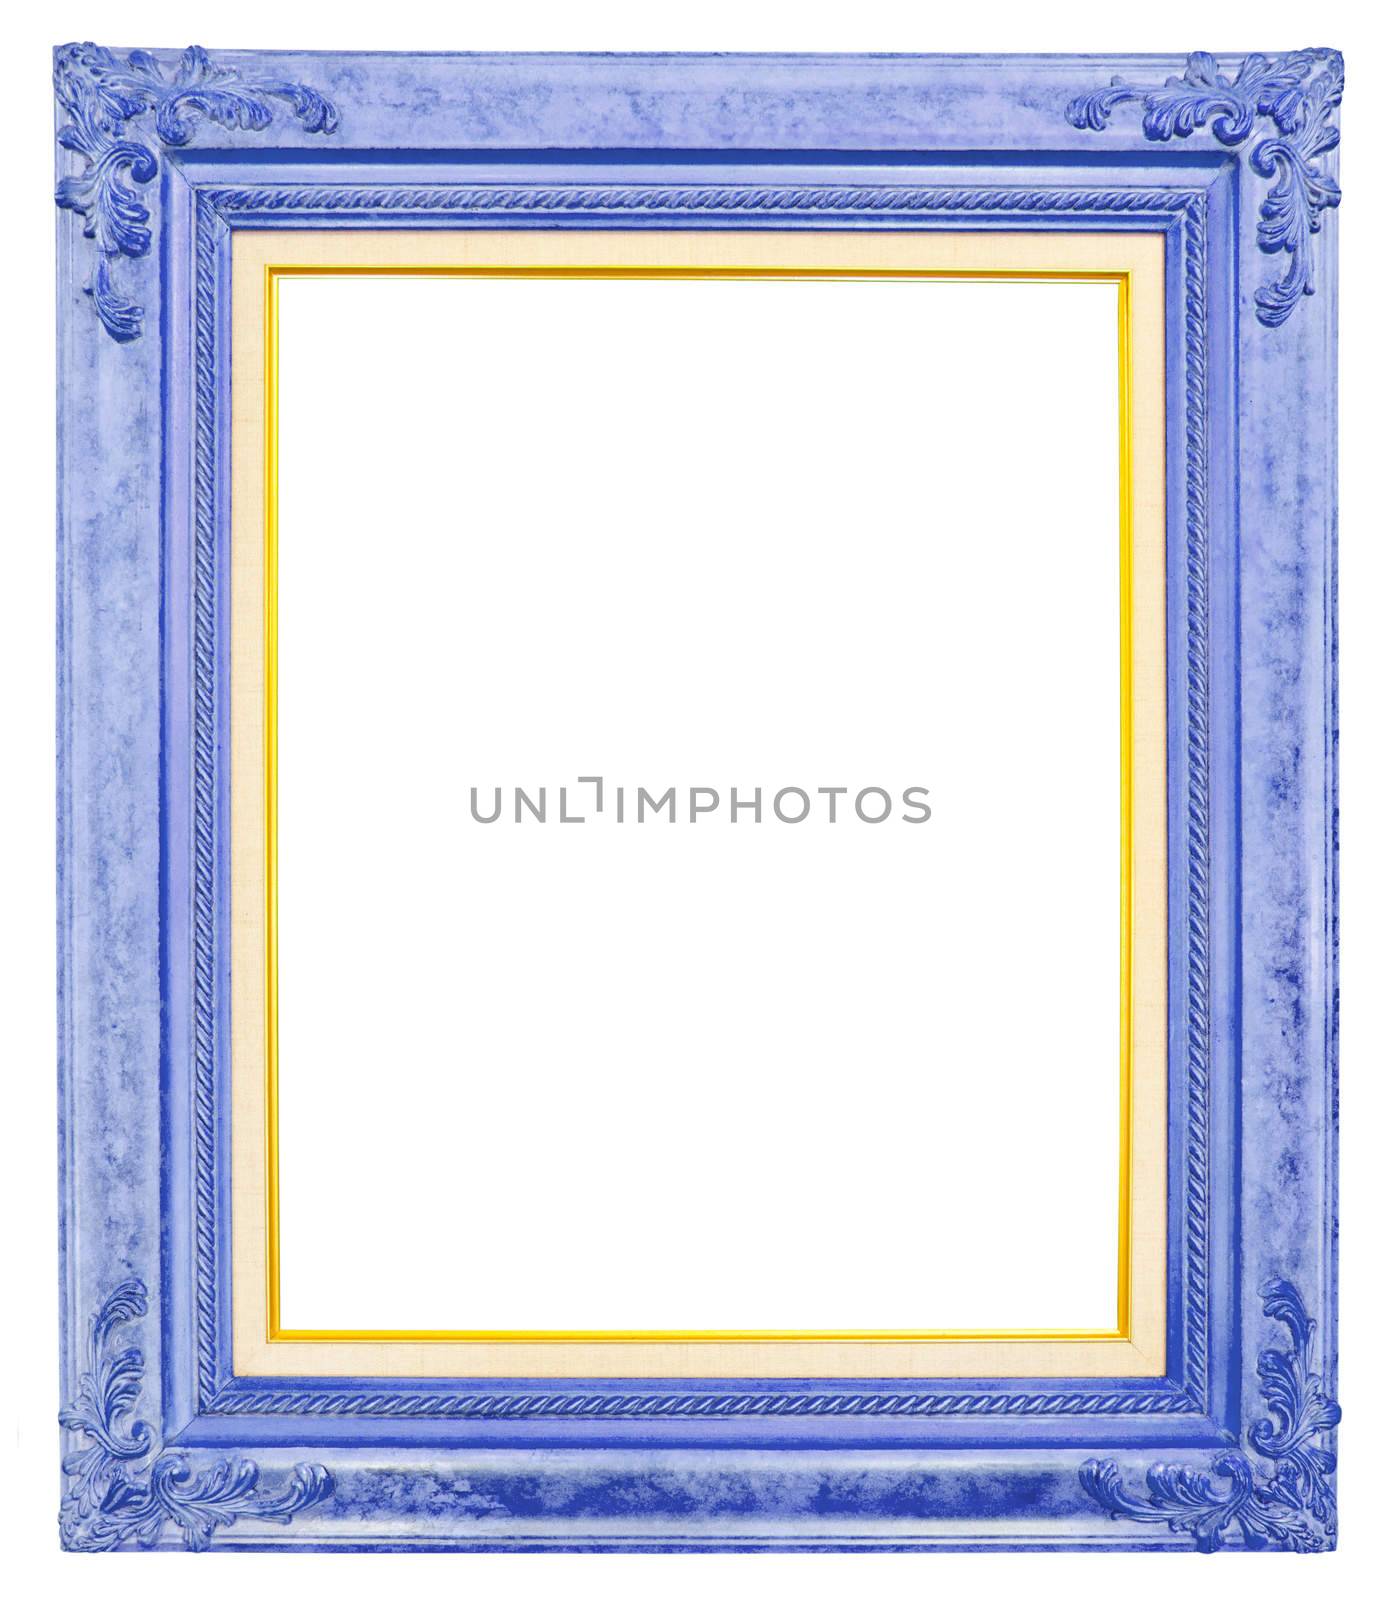 antique frame isolated on white background by Gamjai